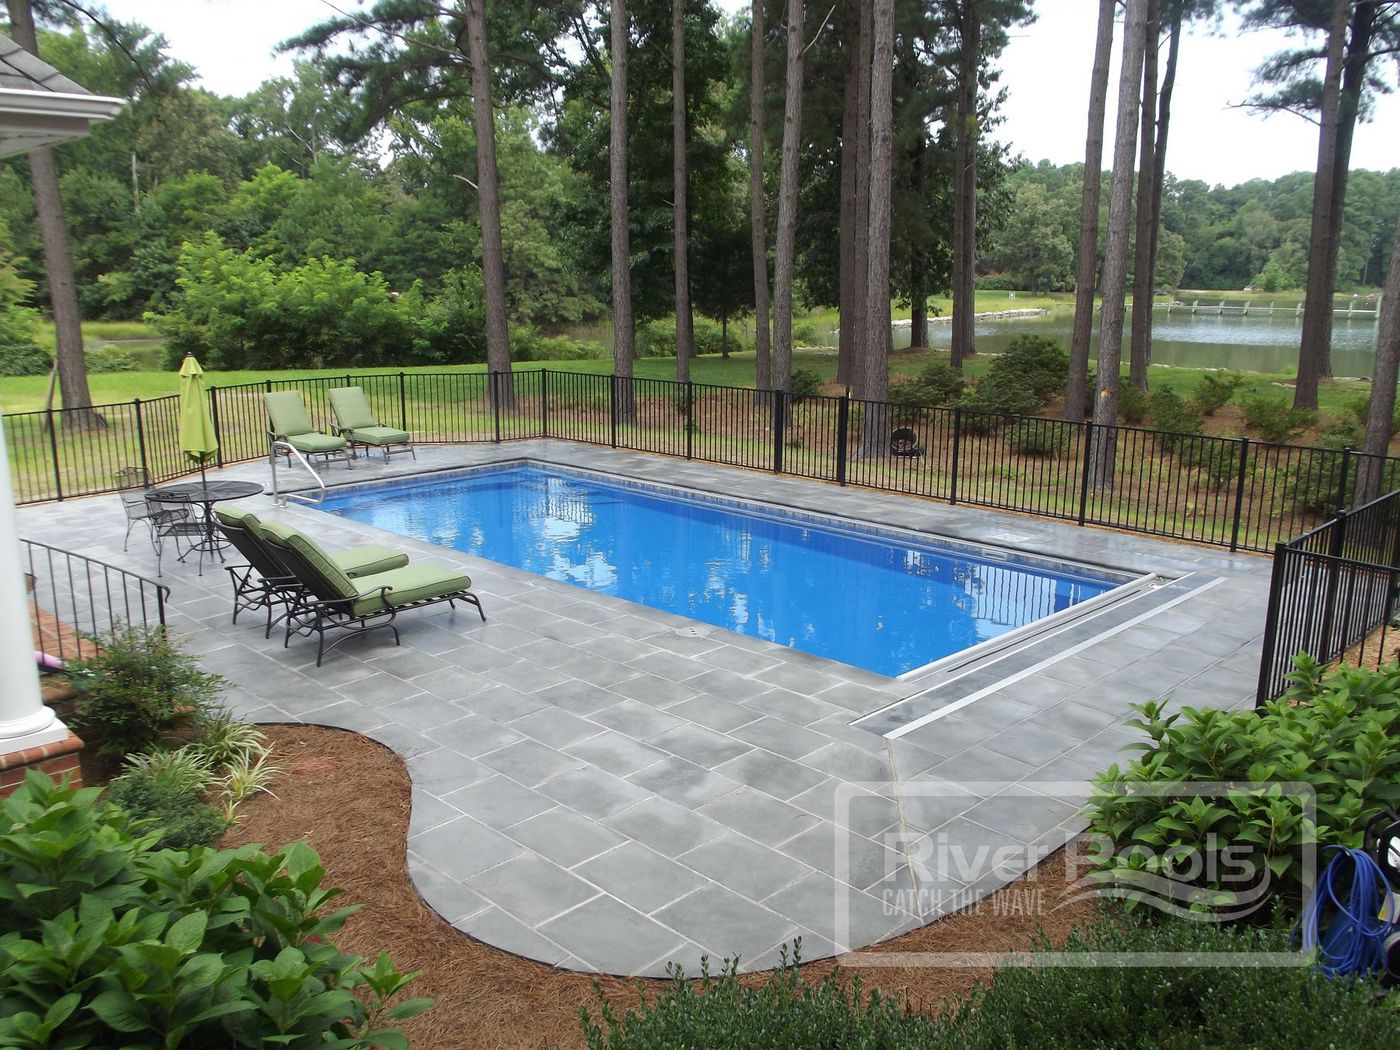 Small Pool Design For A Yard, Backyard Designs With Inground Pools